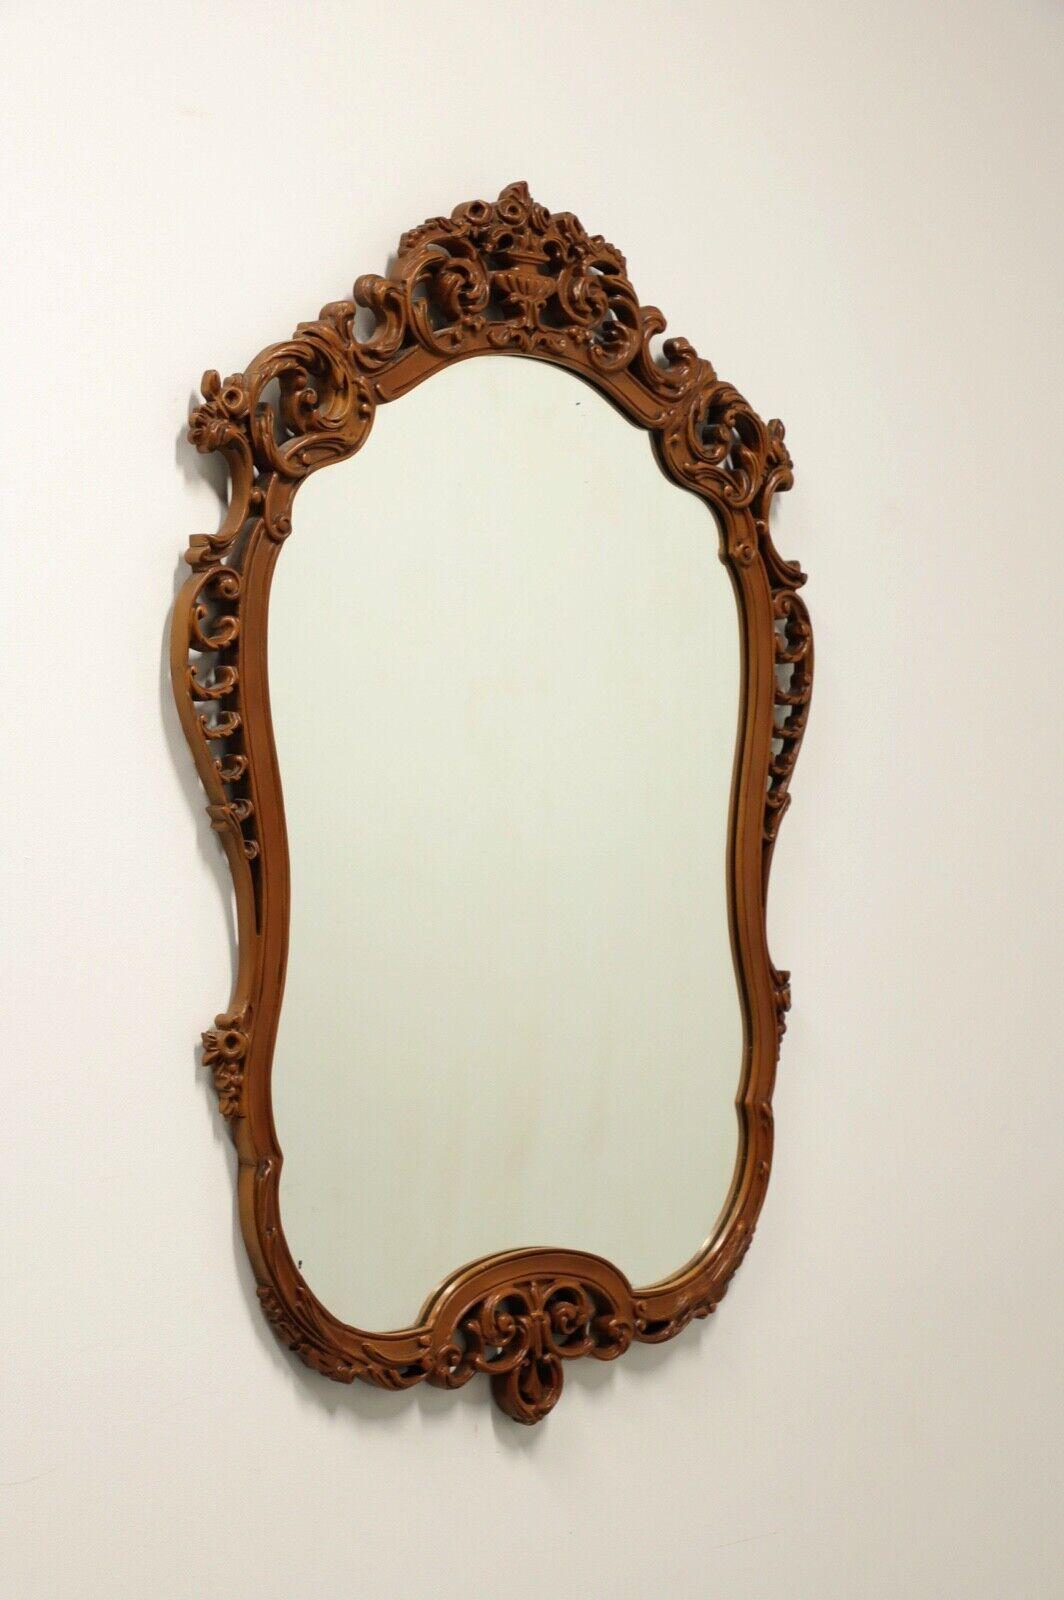 An antique French Country wall mirror, unbranded. Mirrored glass in an intricately carved mahogany frame with a wire hanger. Made in the USA, in the early 20th century.

Measures: 32.5w 1.25d 48h, Weighs Approximately: 30 lbs

Very good antique